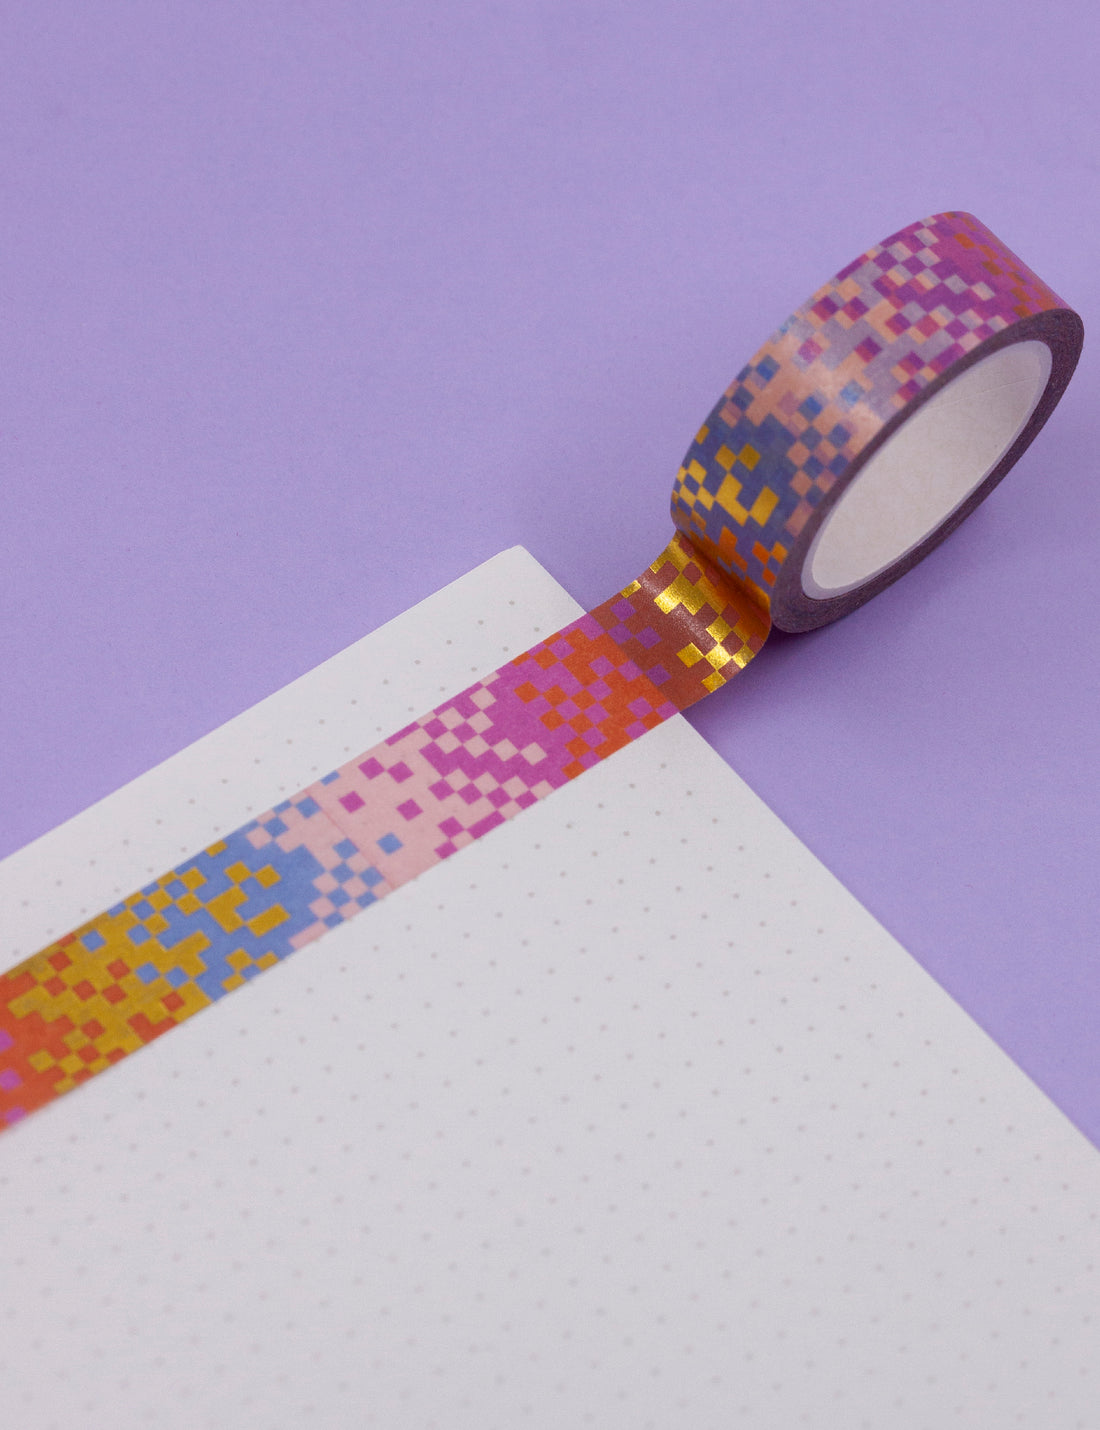 Pixelated gold foil detail washi tape